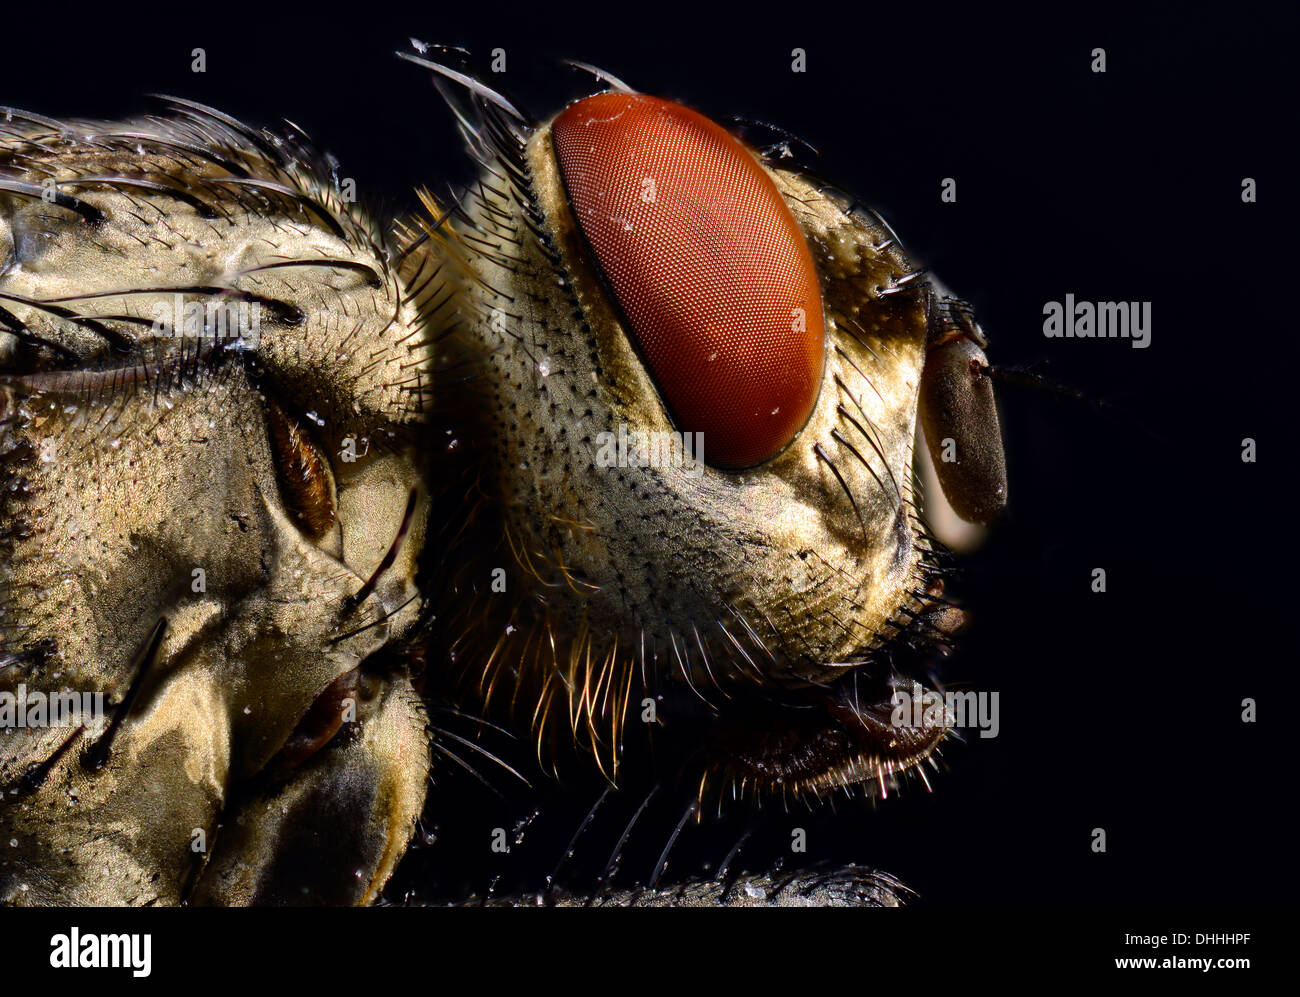 Compound eye, head, Common Housefly (Musca domestica), extreme close-up, Baden-Württemberg, Germany Stock Photo